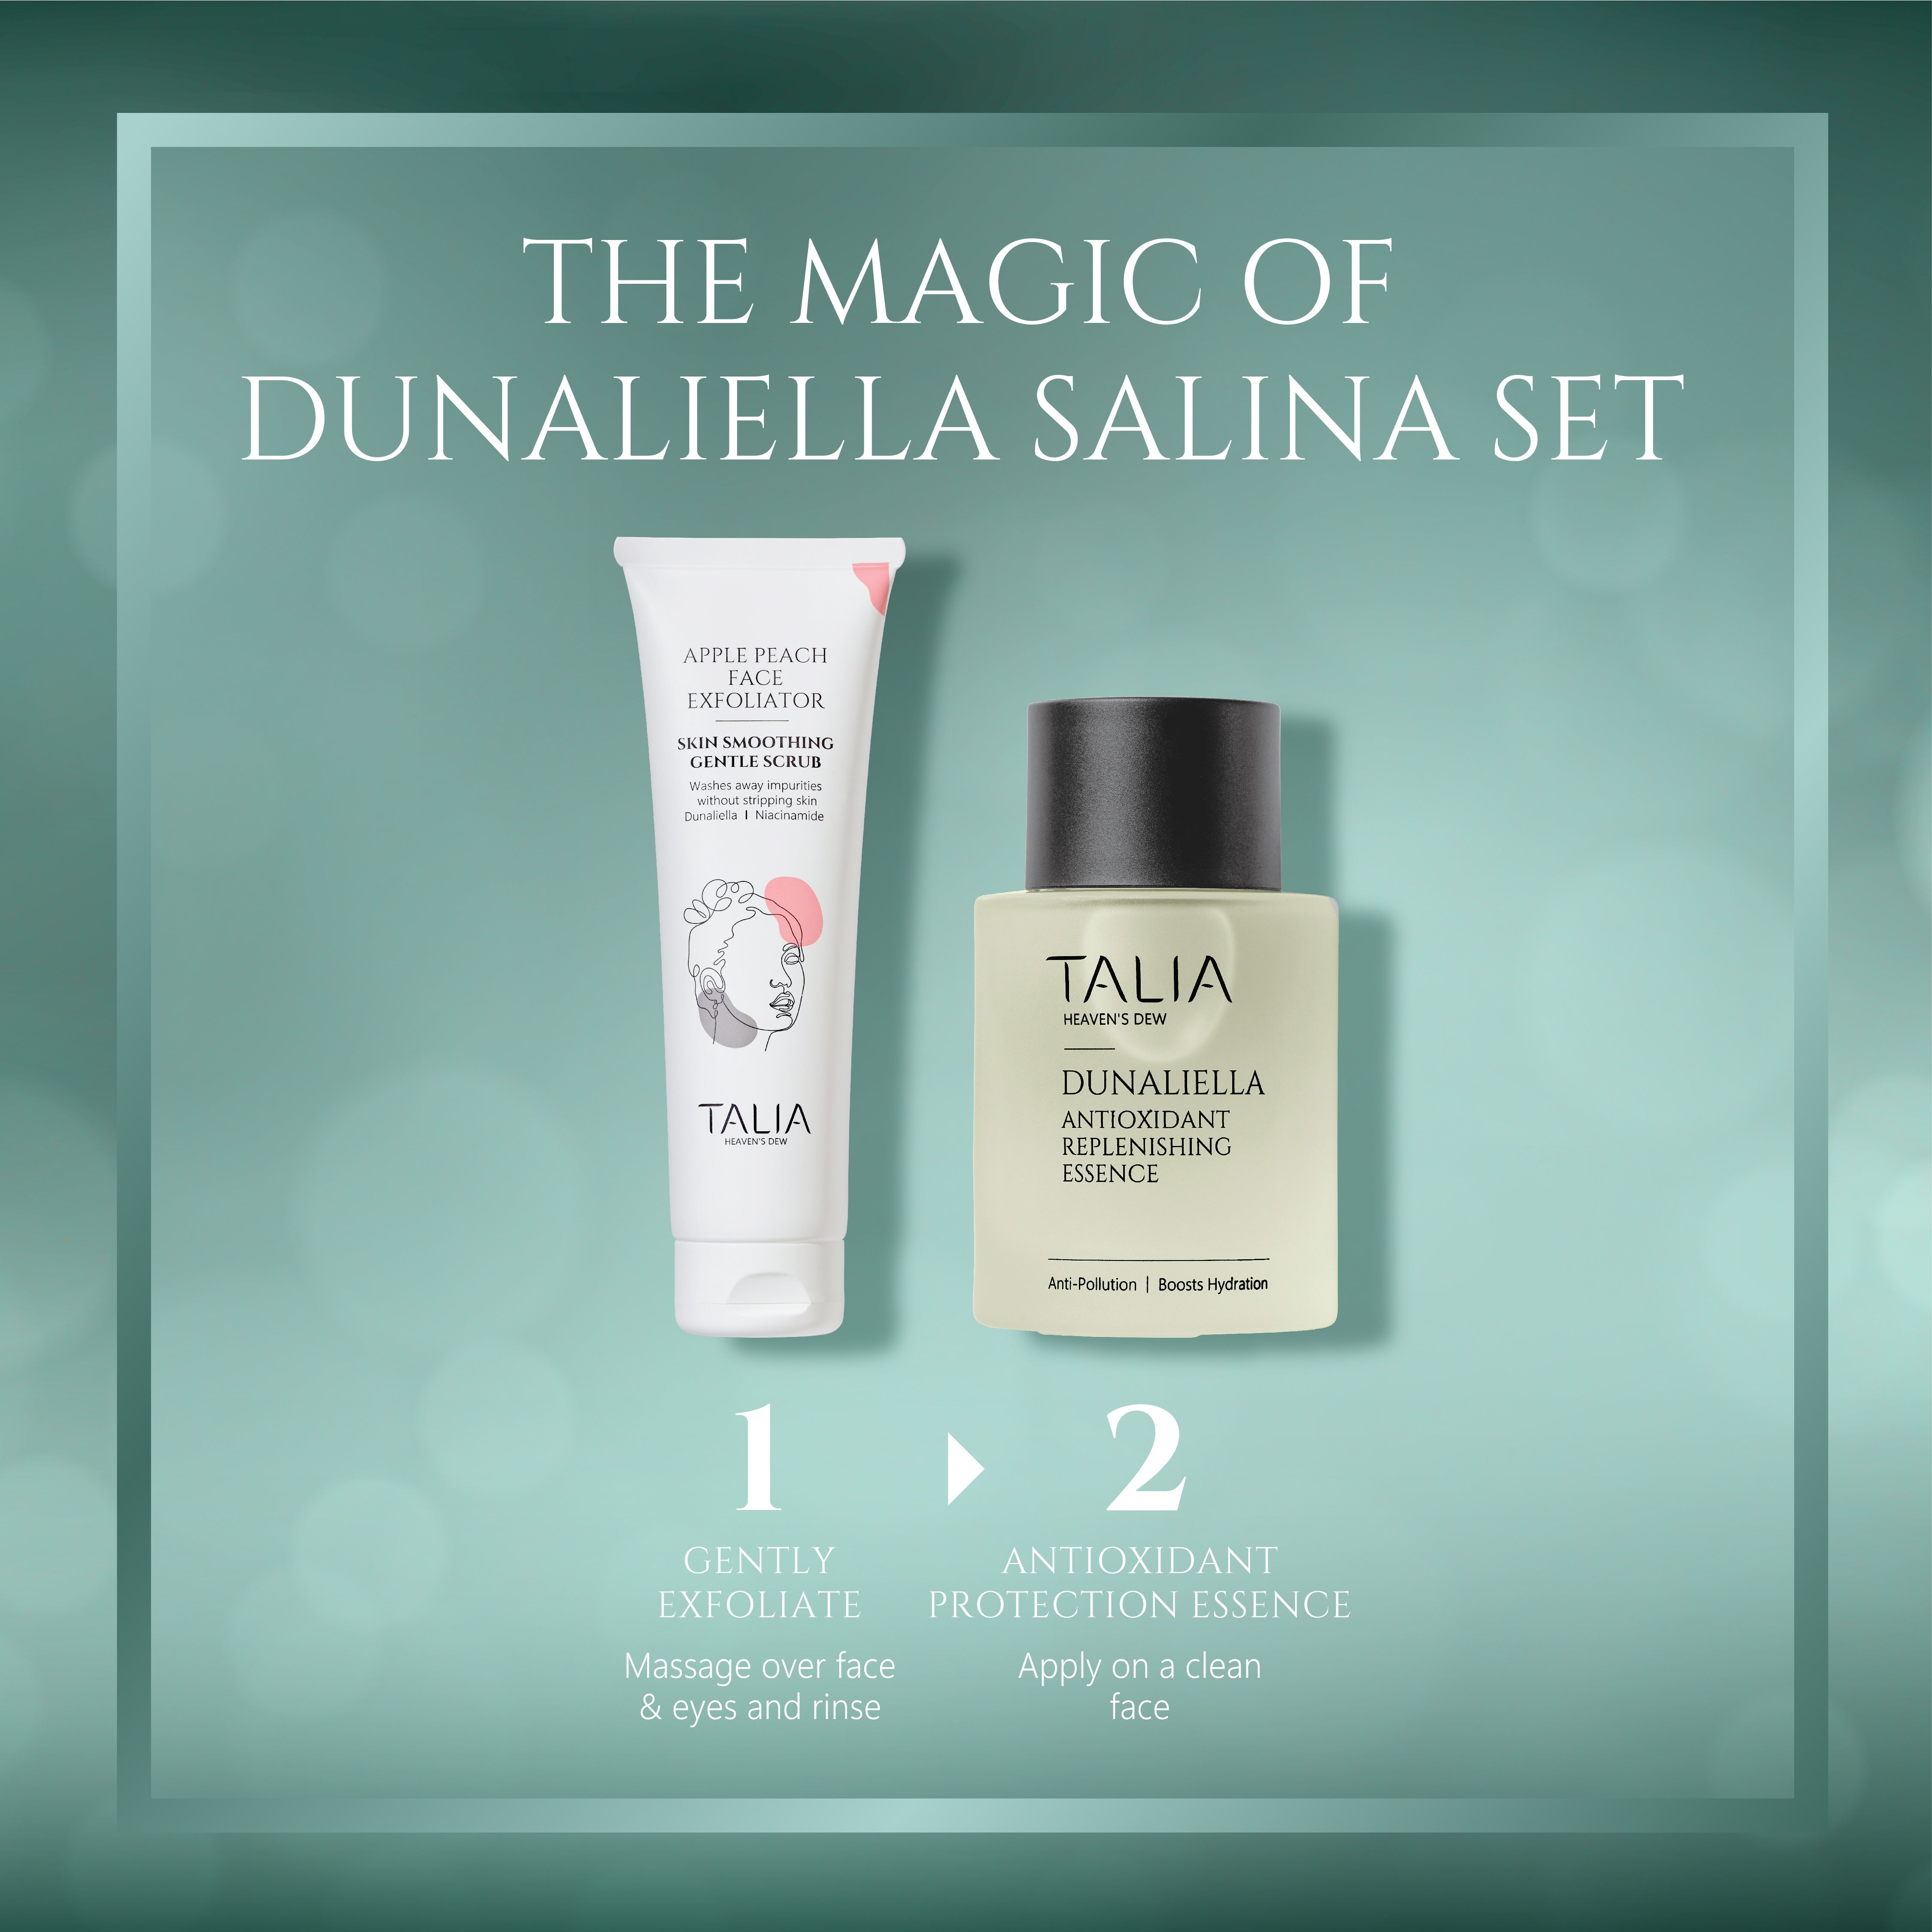 Cleanse & Protect Duo Skincare Set